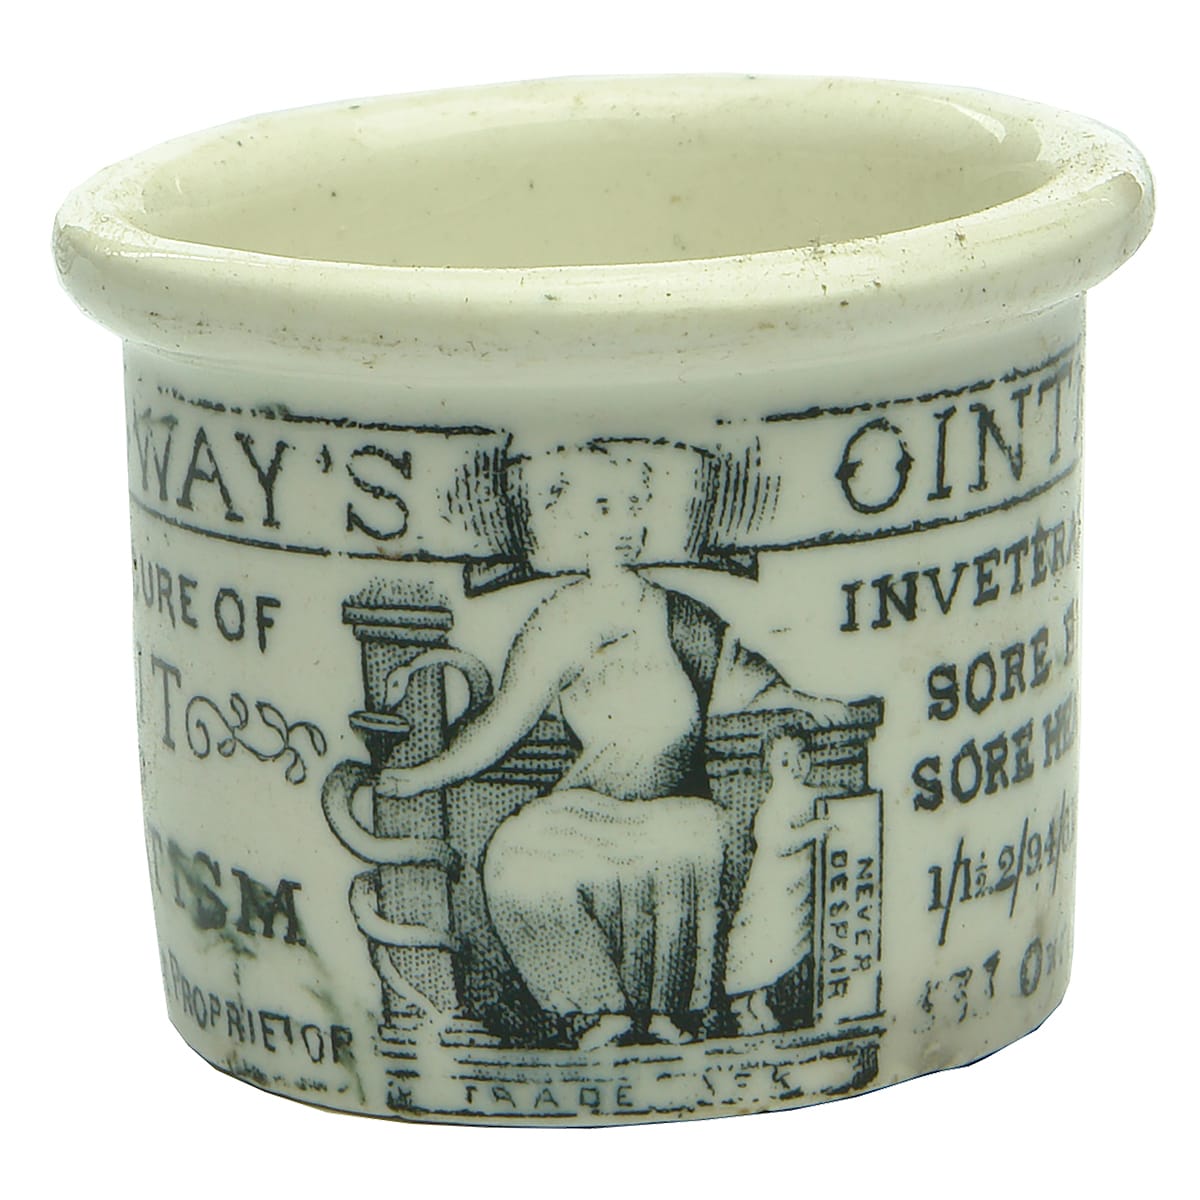 Ointment Pot. Holloway's Ointment. Oxford St., London.